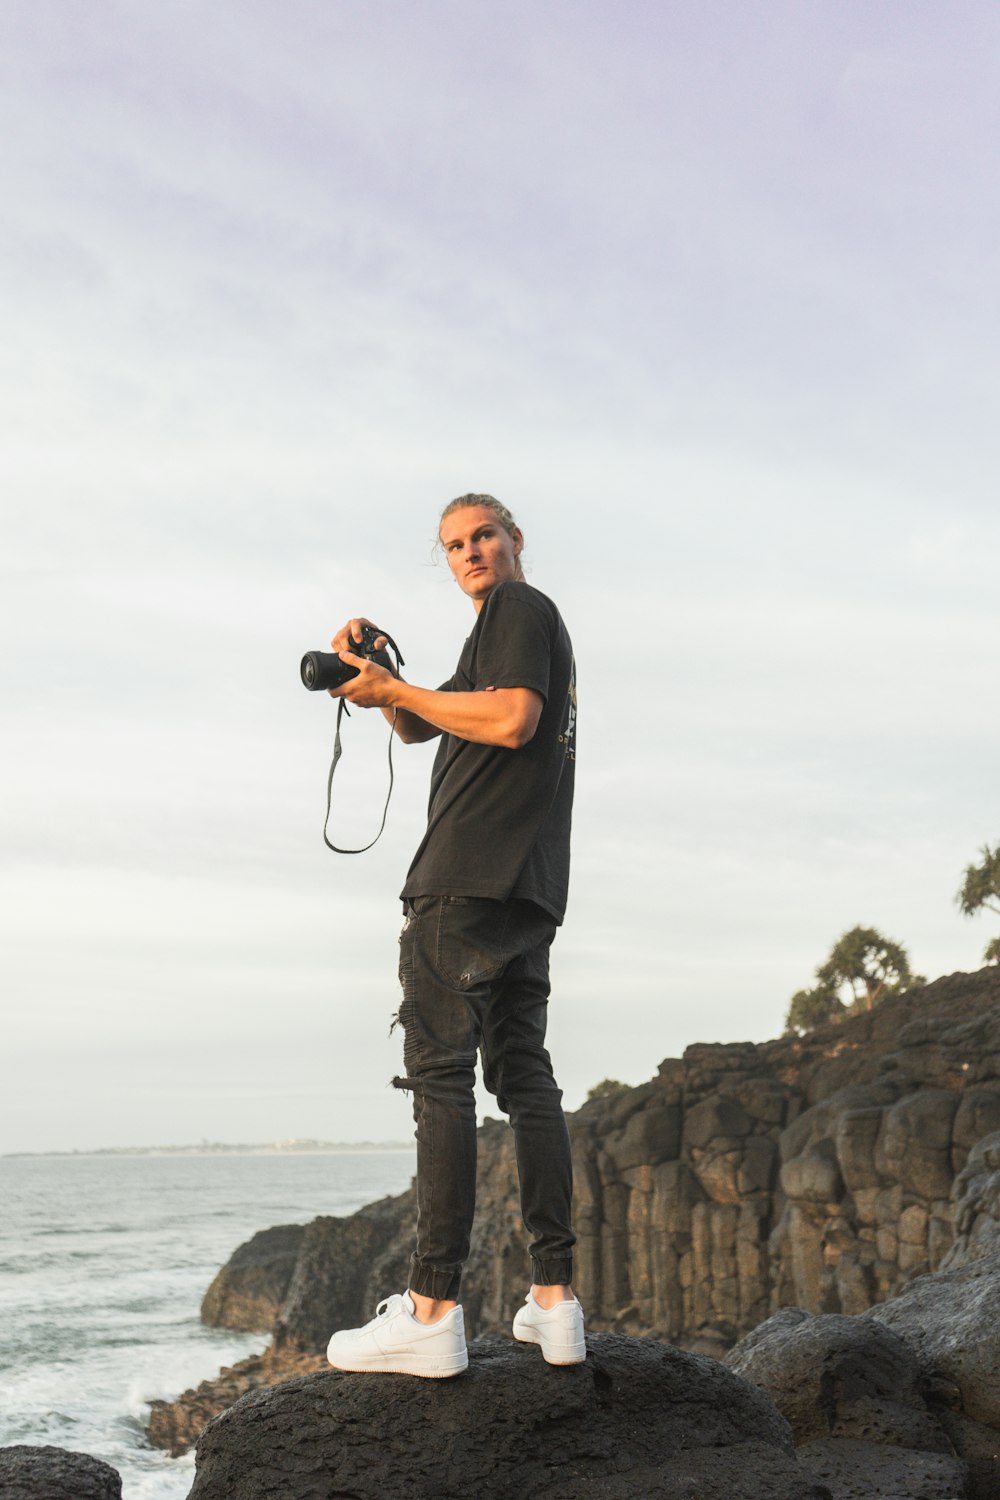 man in black t-shirt and gray pants holding camera standing on rock formation near sea